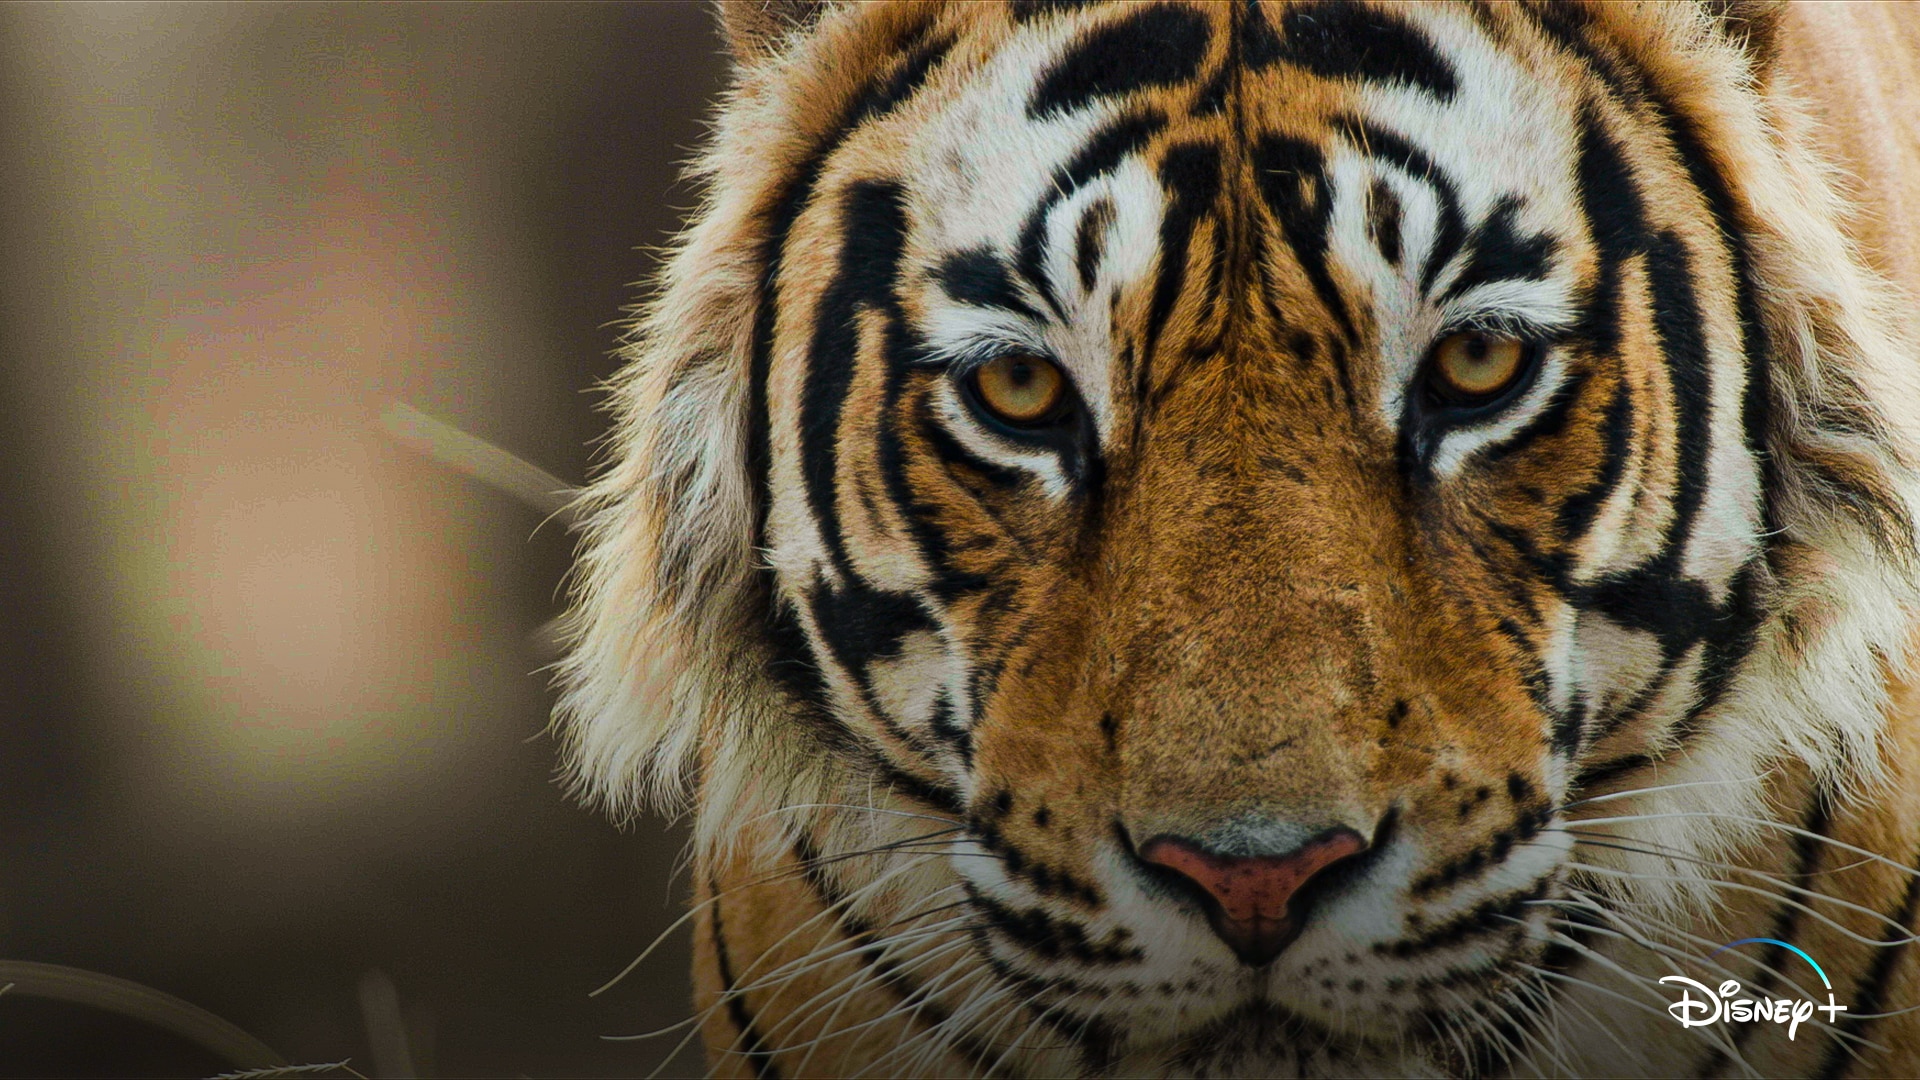 First Look At DisneyNature’s “Tiger” What's On Disney Plus